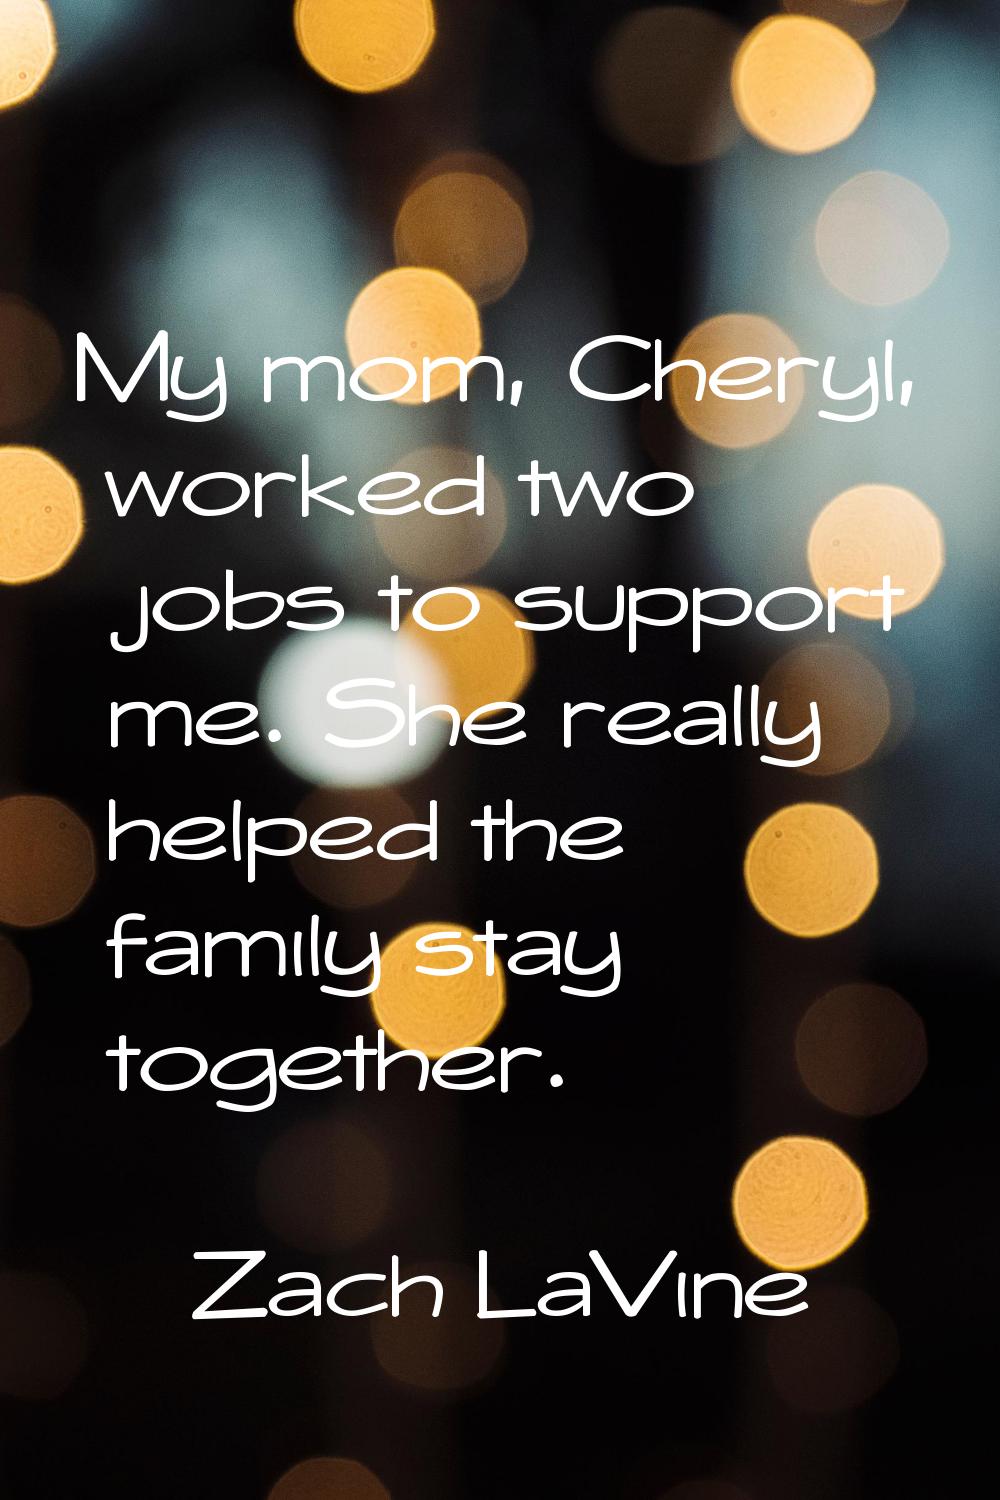 My mom, Cheryl, worked two jobs to support me. She really helped the family stay together.